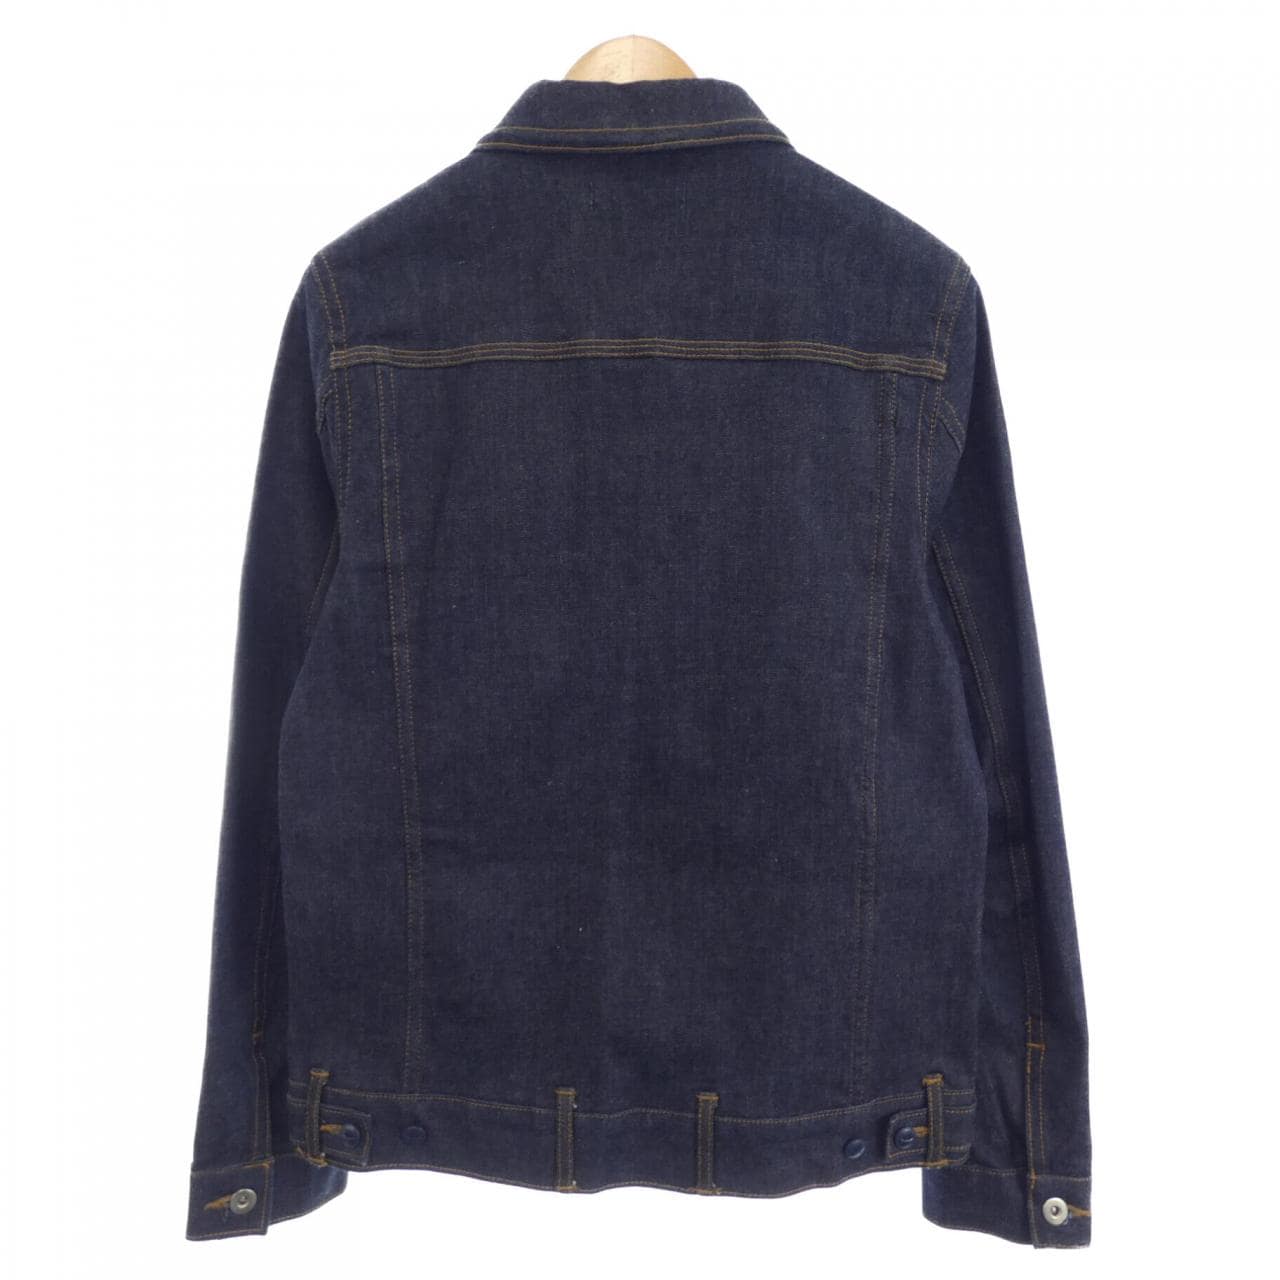 KOMEHYO|DISCOVERED BLOUSON|DISCOVERED|Men's FASHION|OUTER JACKET